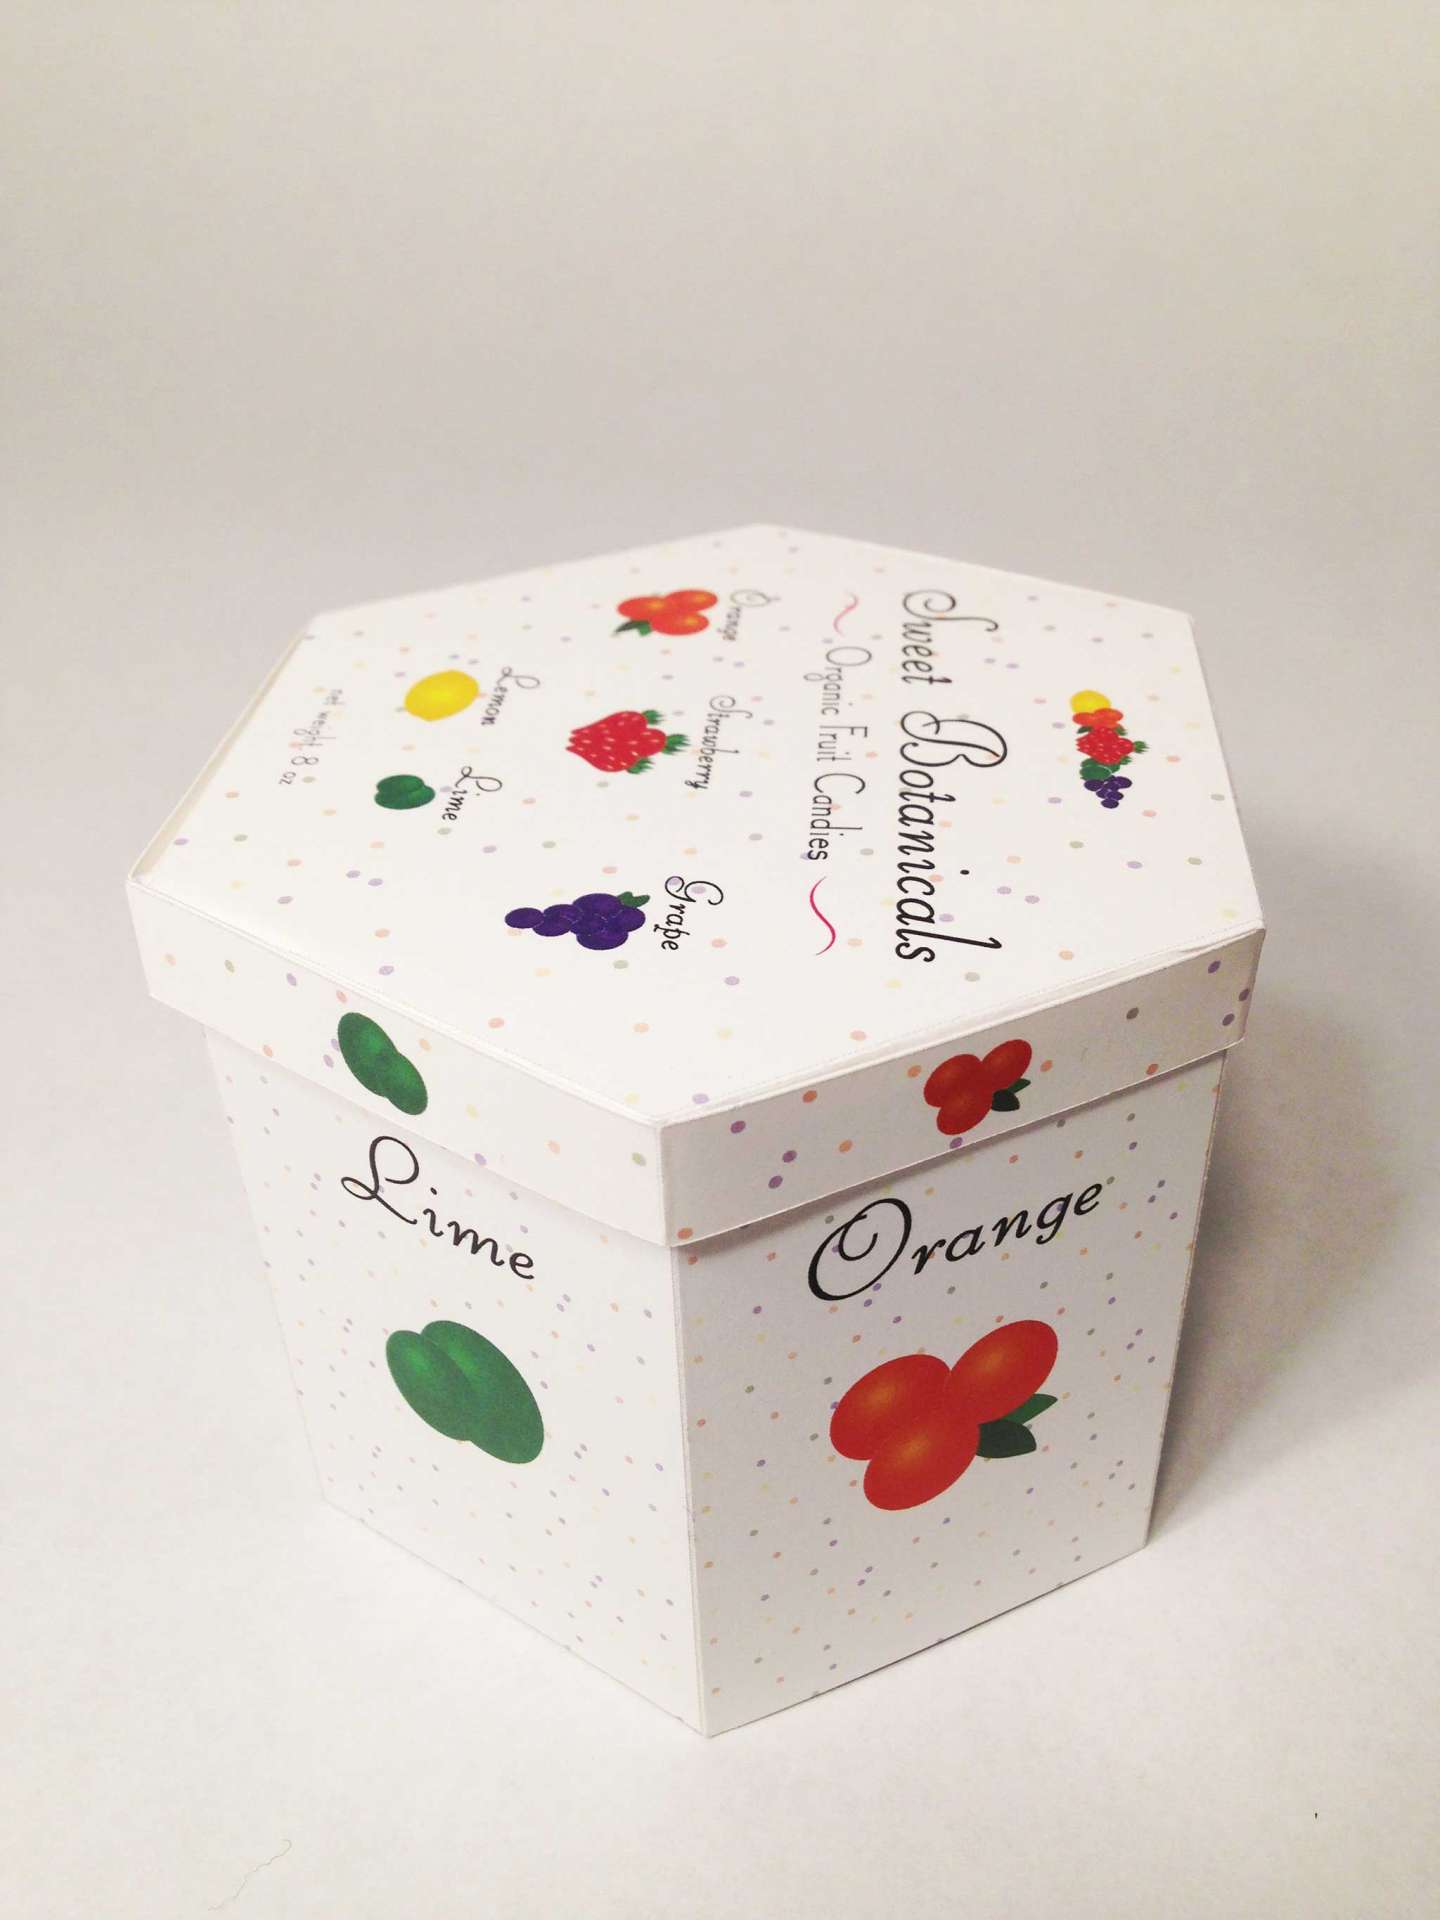 Sweet Botanicals Candy Package